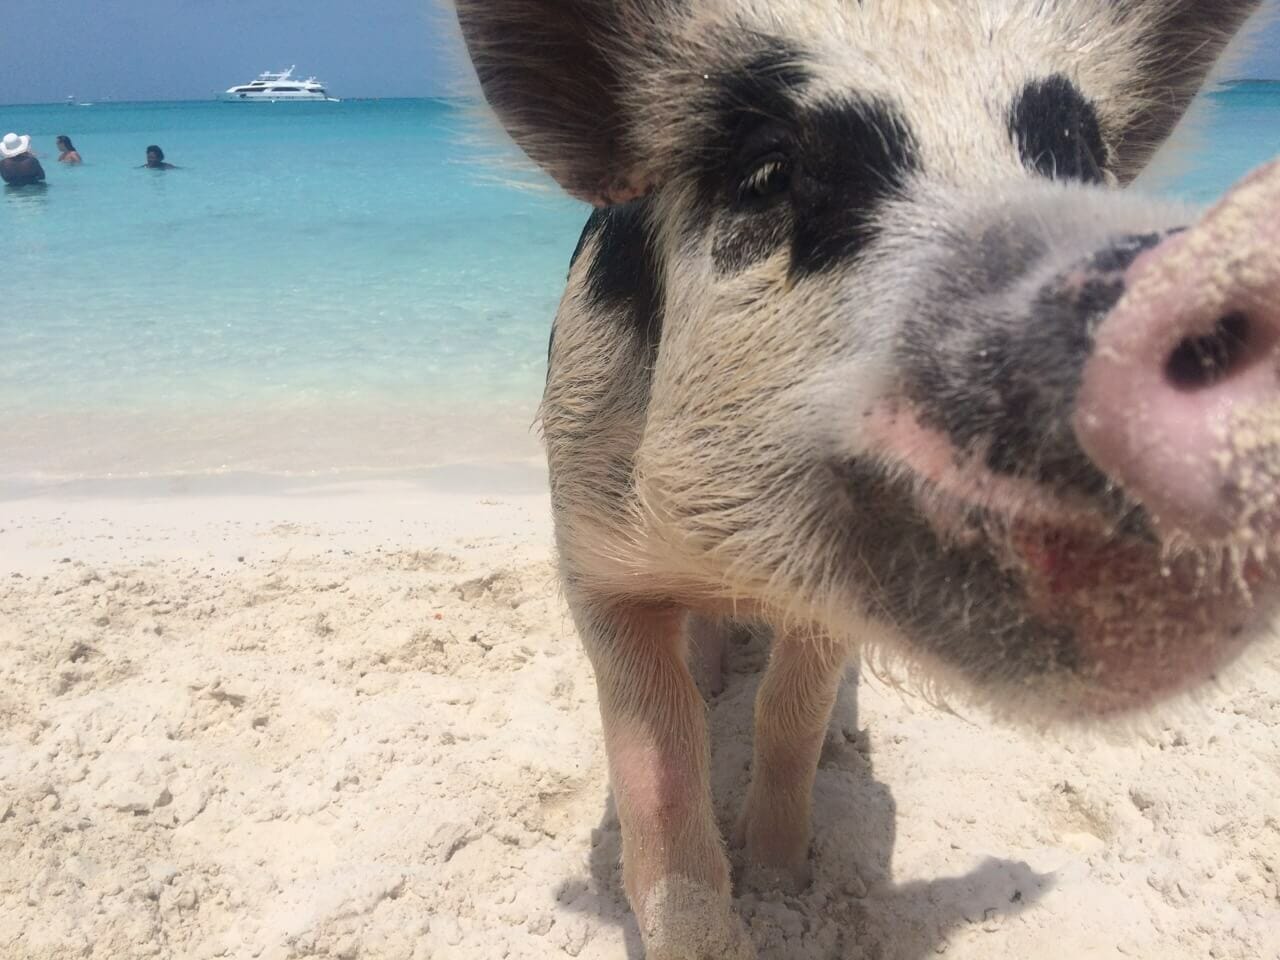 How to get to Pig Beach, Bahamas